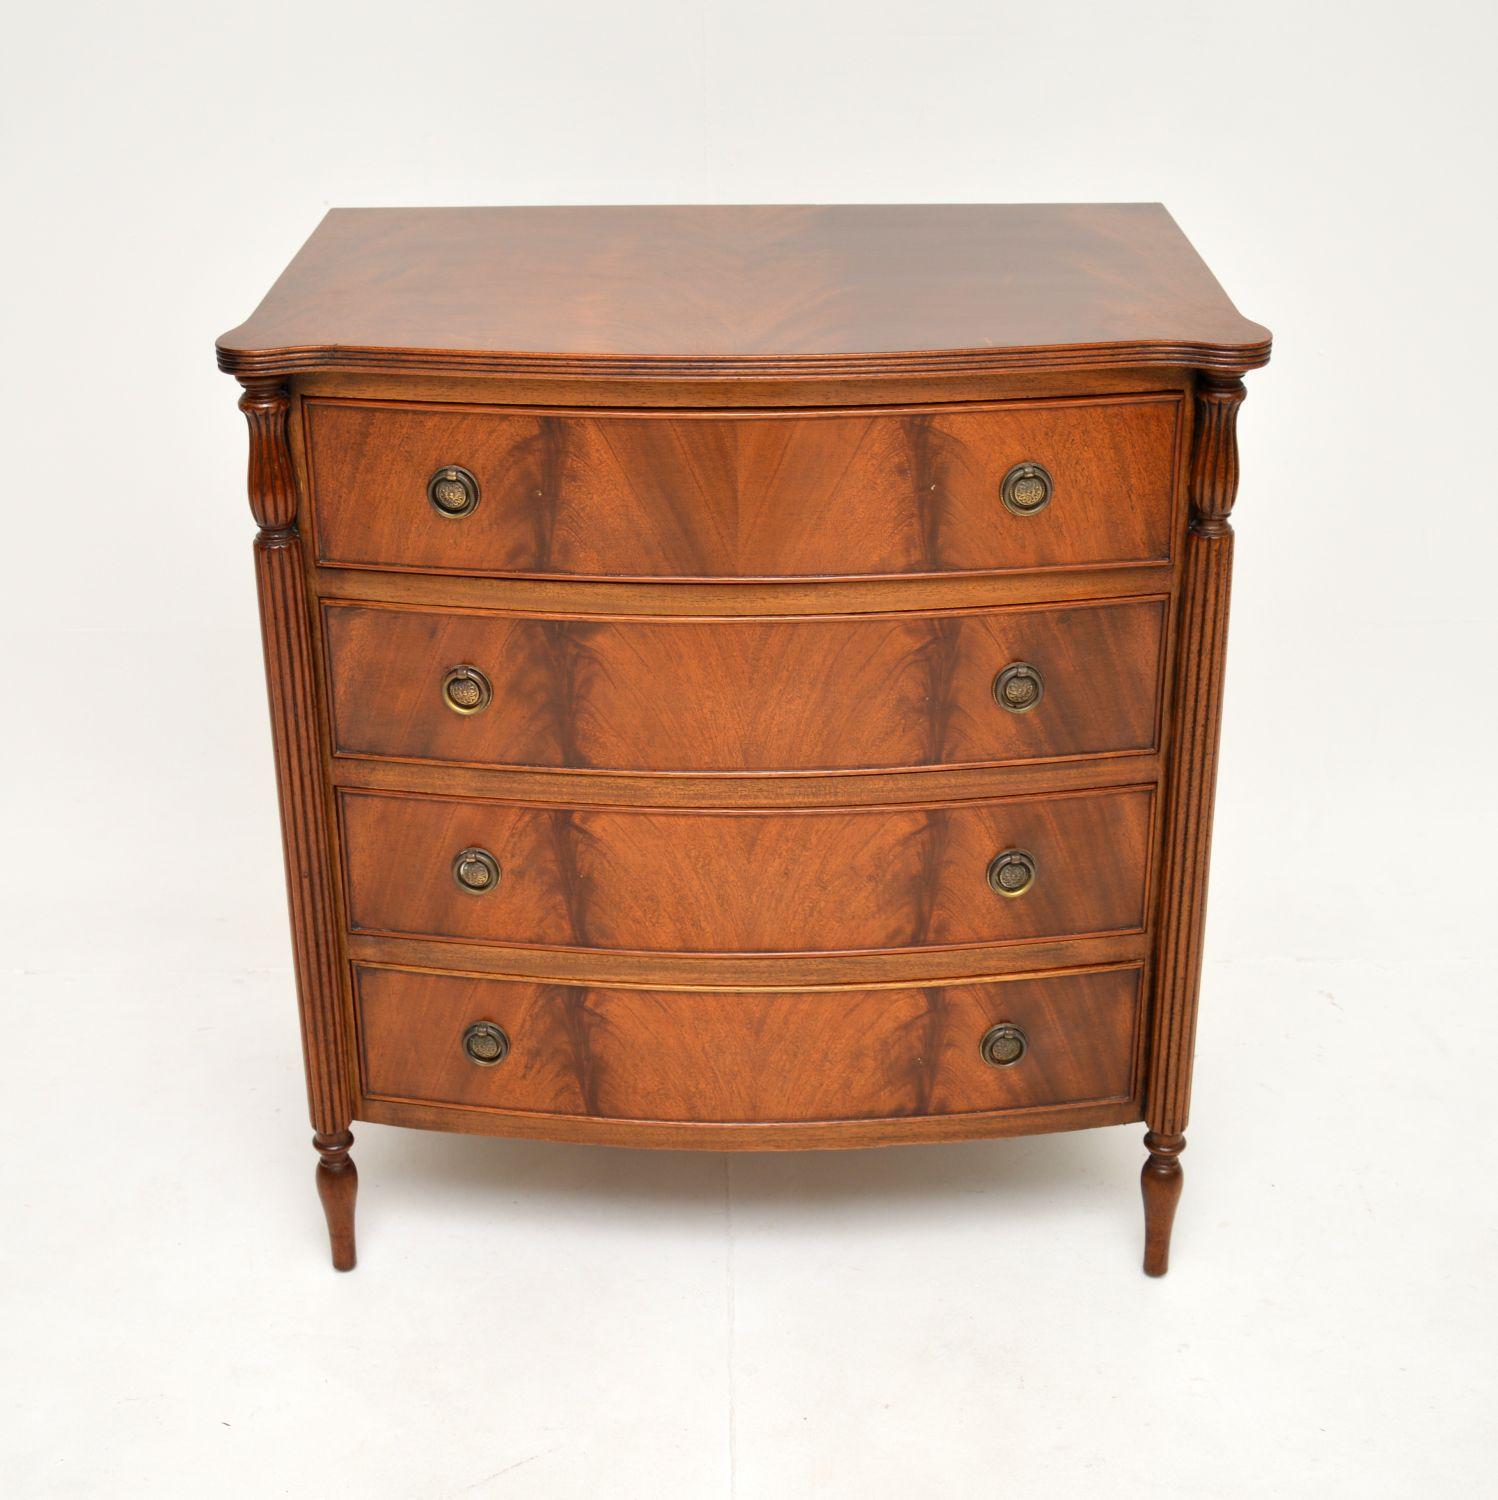 A beautiful antique bow front chest of drawers. This was made in England, it dates from around the 1930’s.

This is of superb quality and has some fine features. The drawer fronts have gorgeous flamed grain patterns with lovely brass ring pull